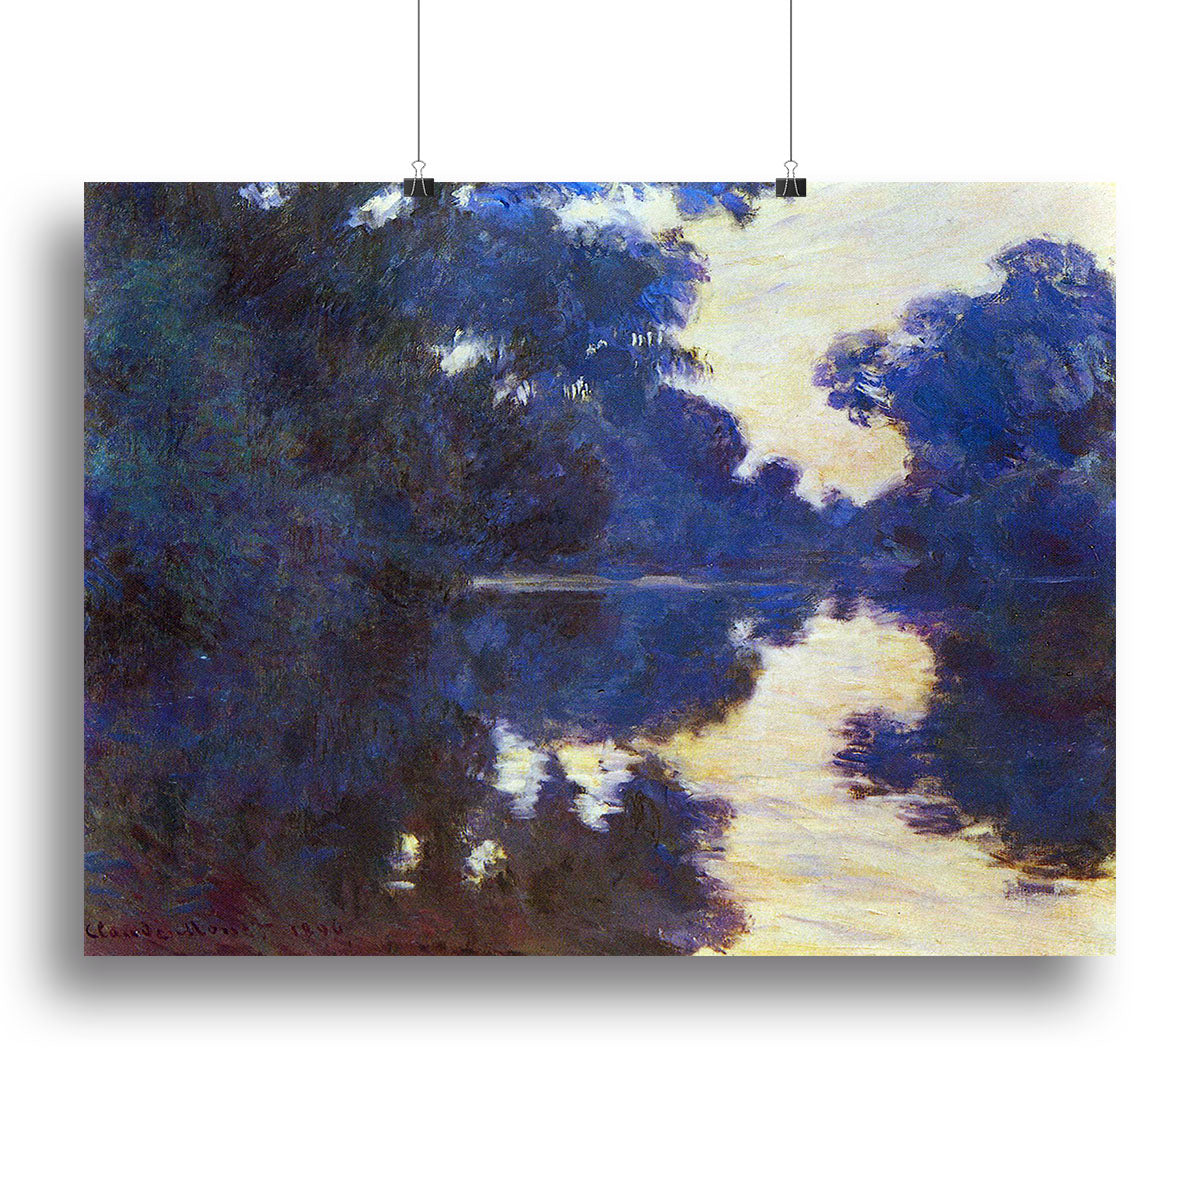 Seine in Morning 2 by Monet Canvas Print or Poster - Canvas Art Rocks - 2